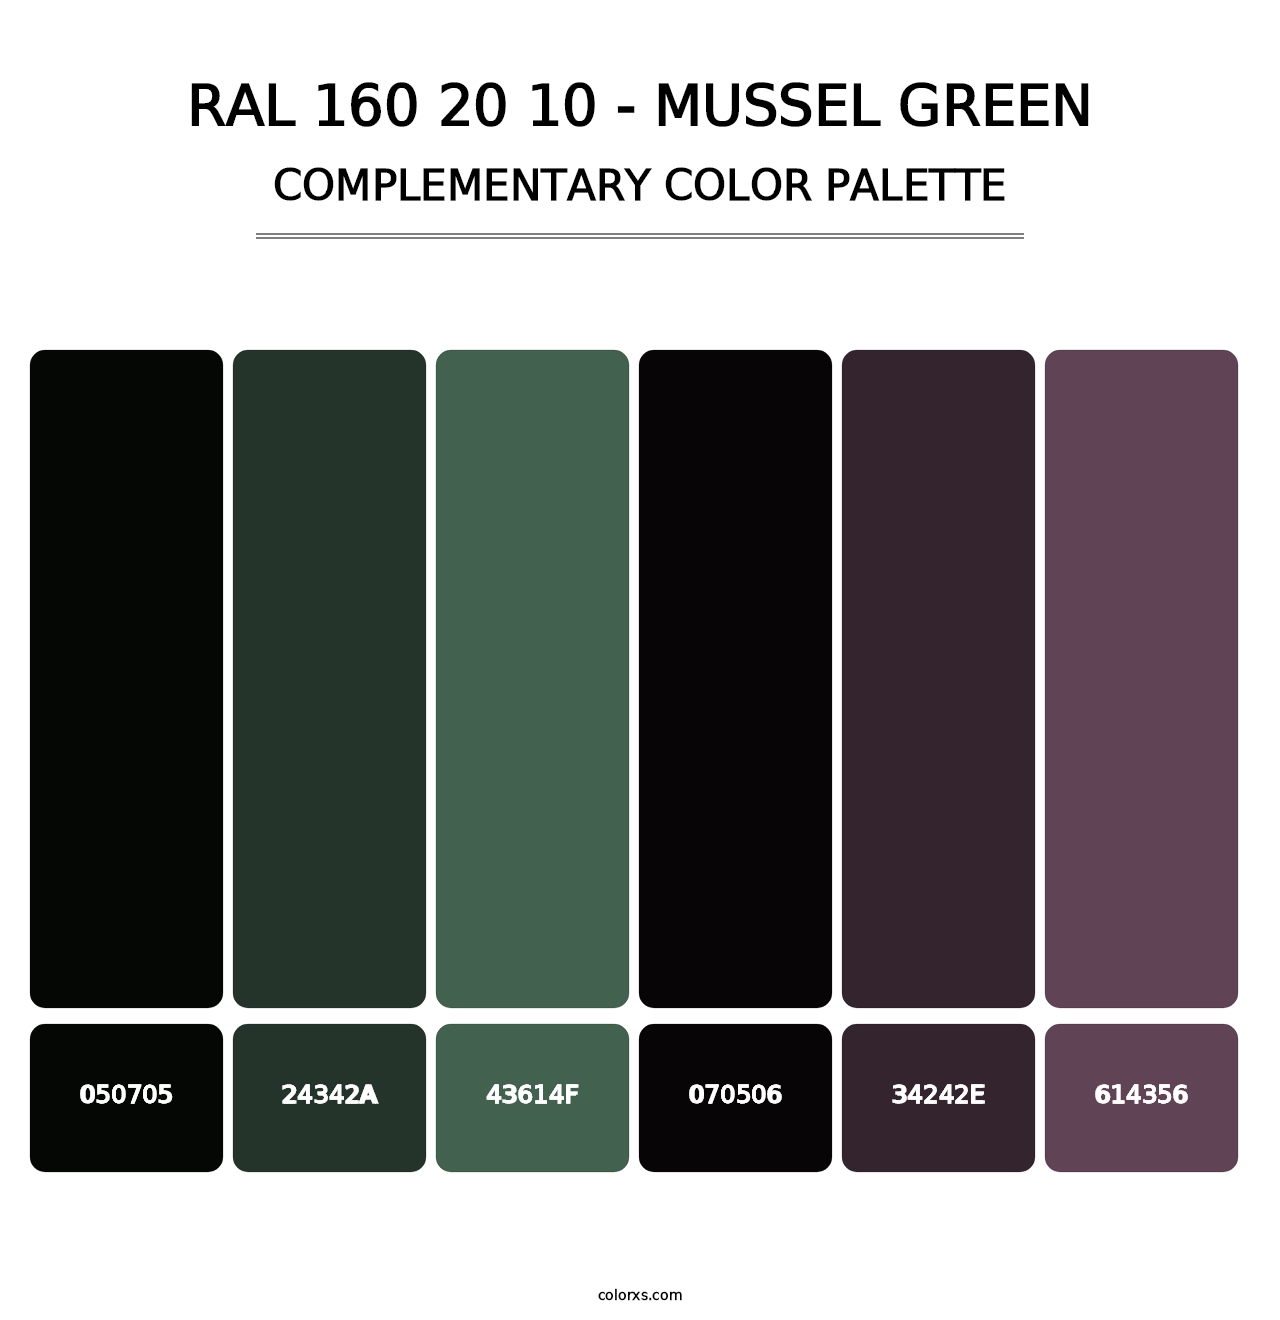 RAL 160 20 10 - Mussel Green - Complementary Color Palette